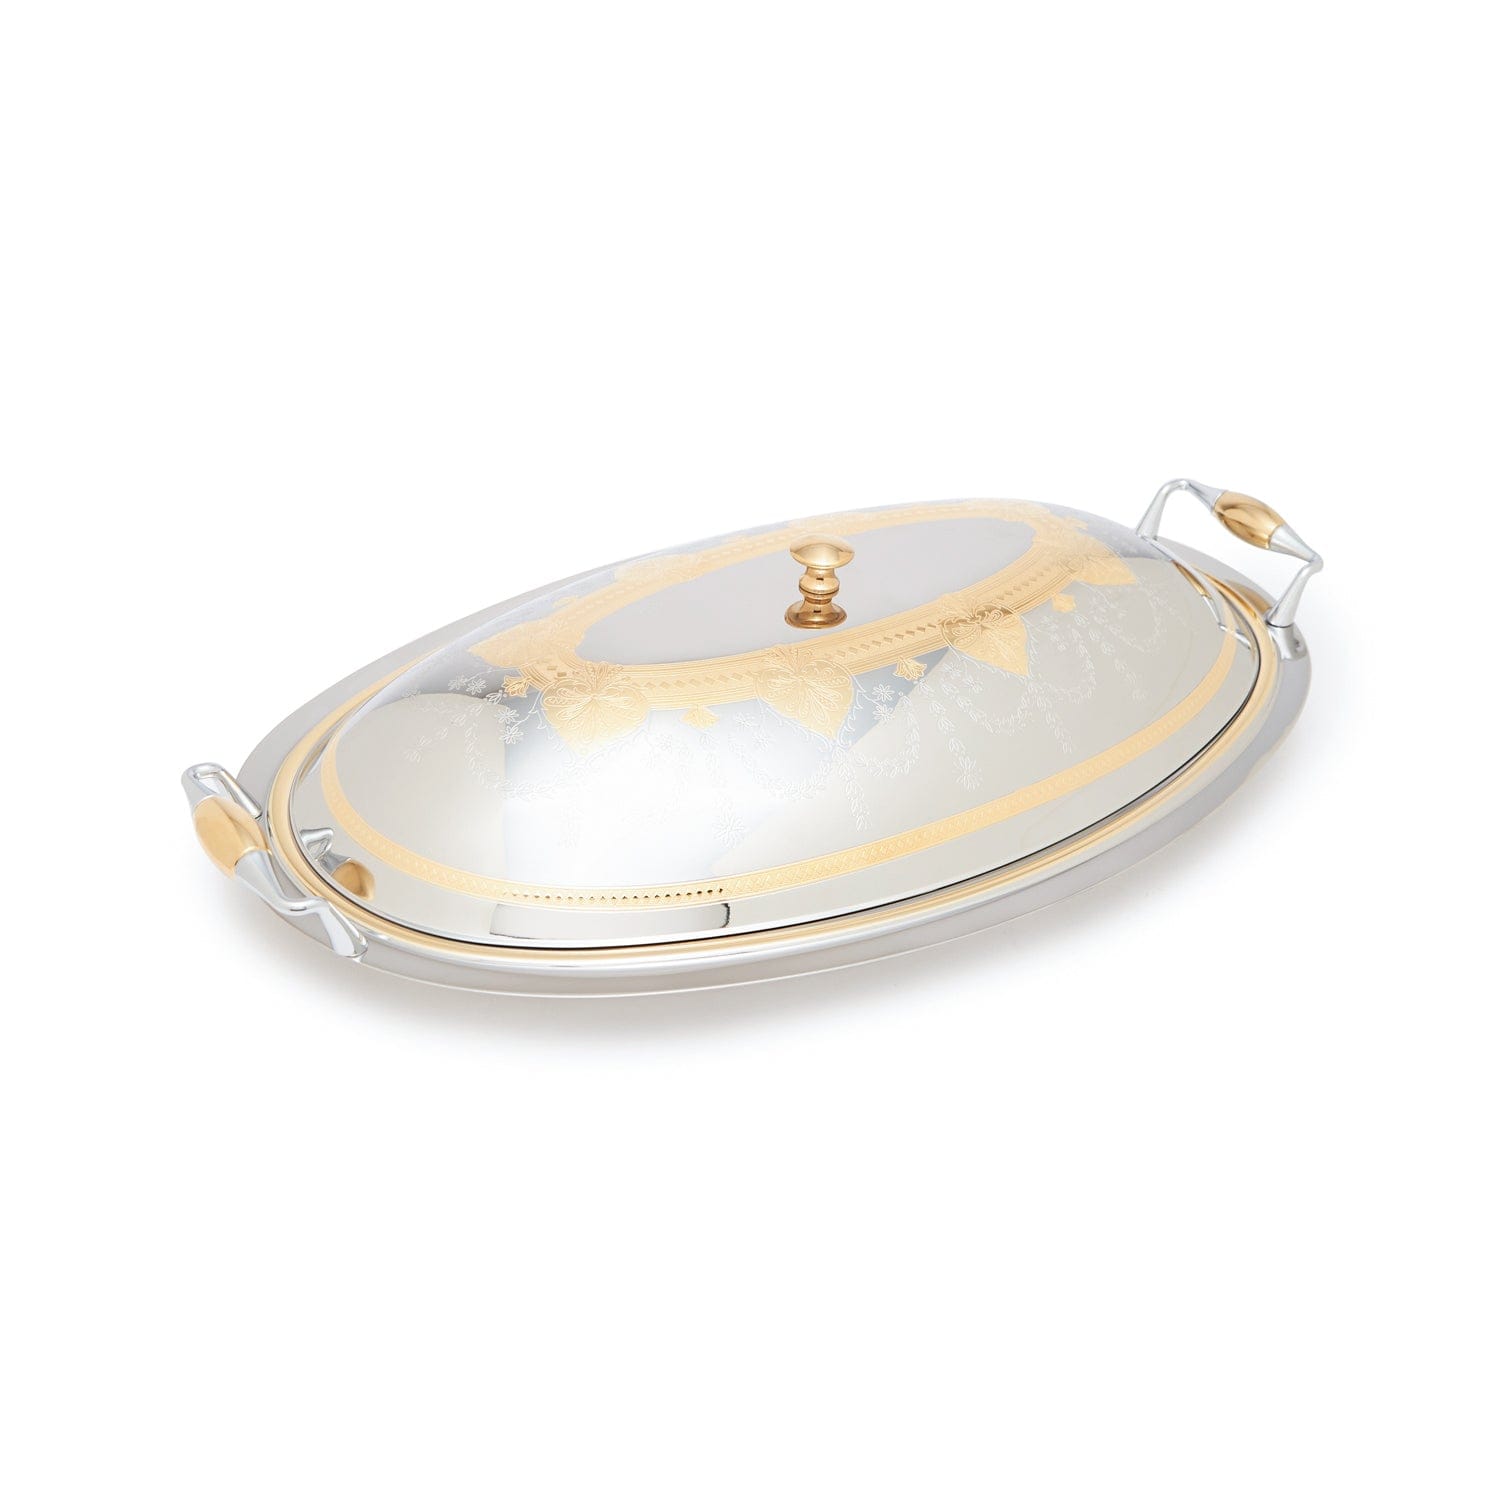 Tresors Laila Gold Oval Risotto - RO-1460/LAI-G
